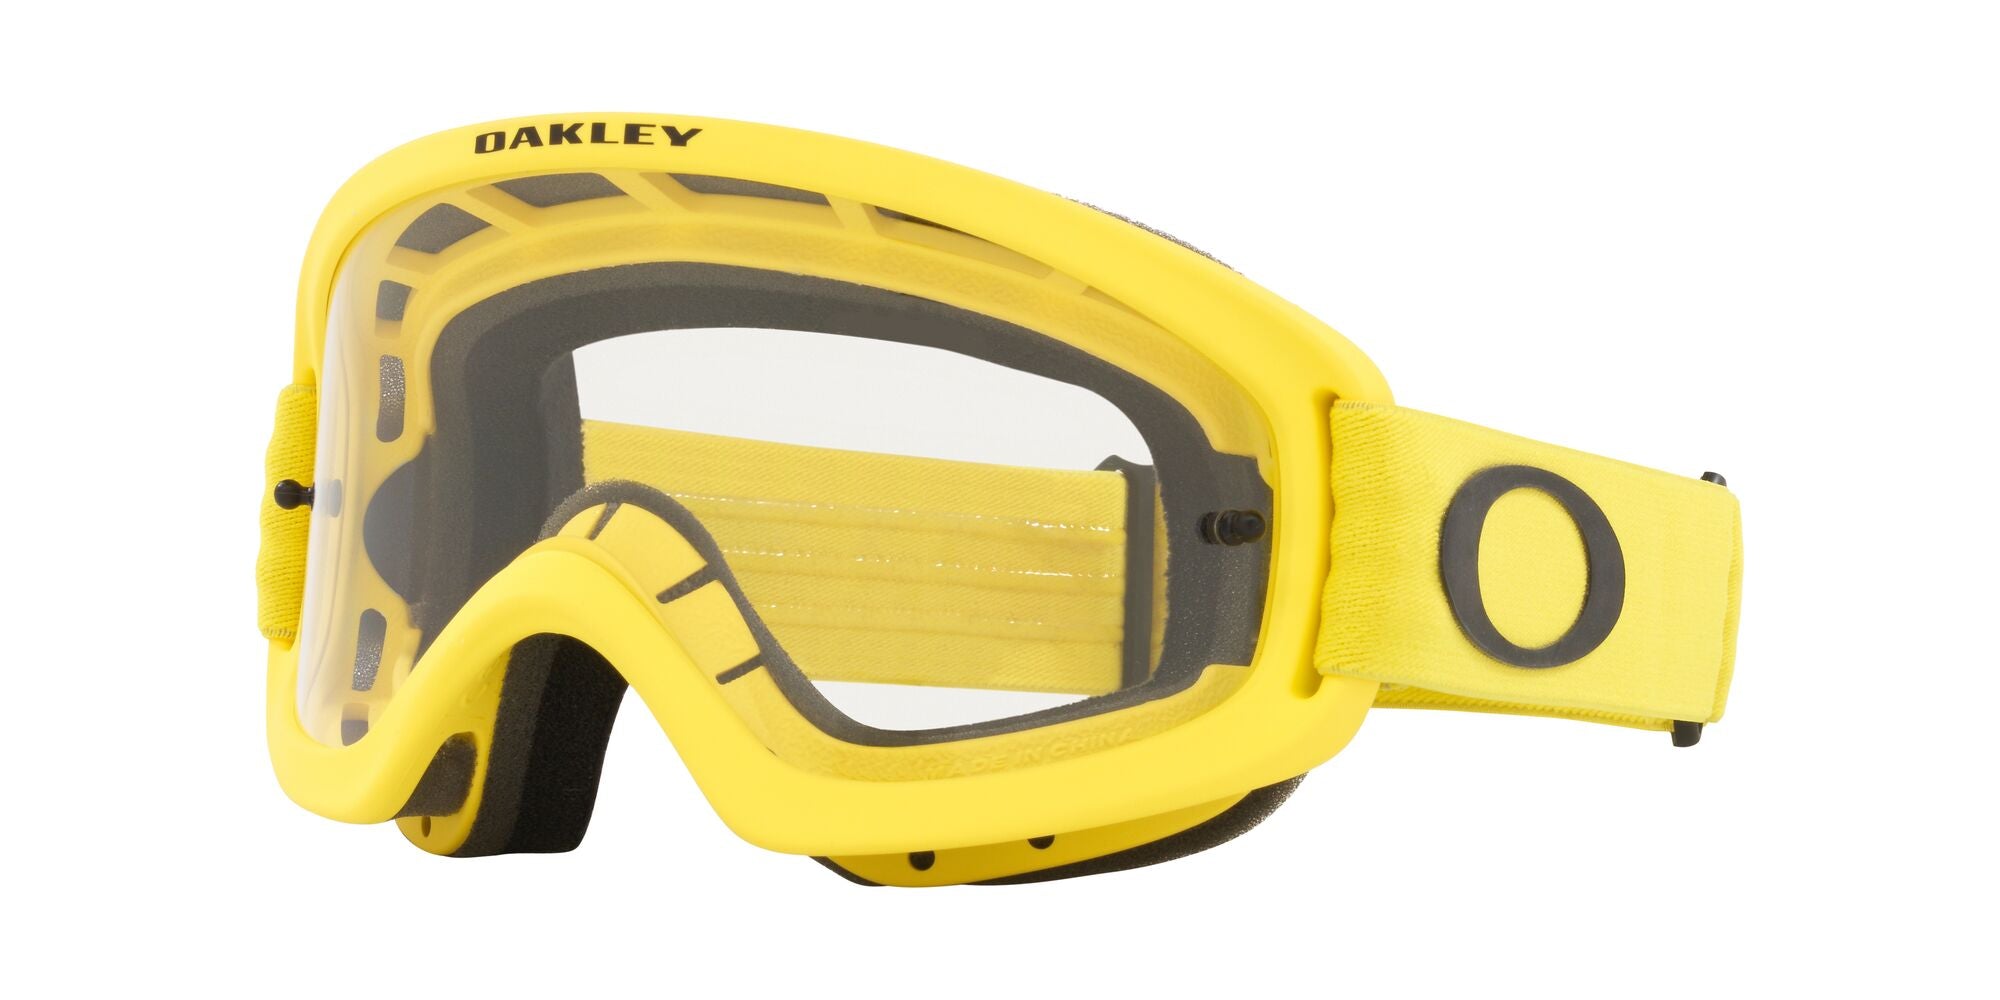 Oakley O Frame 2.0 Pro XS MX Goggle in Moto Yellow with Clear Lens on White Background